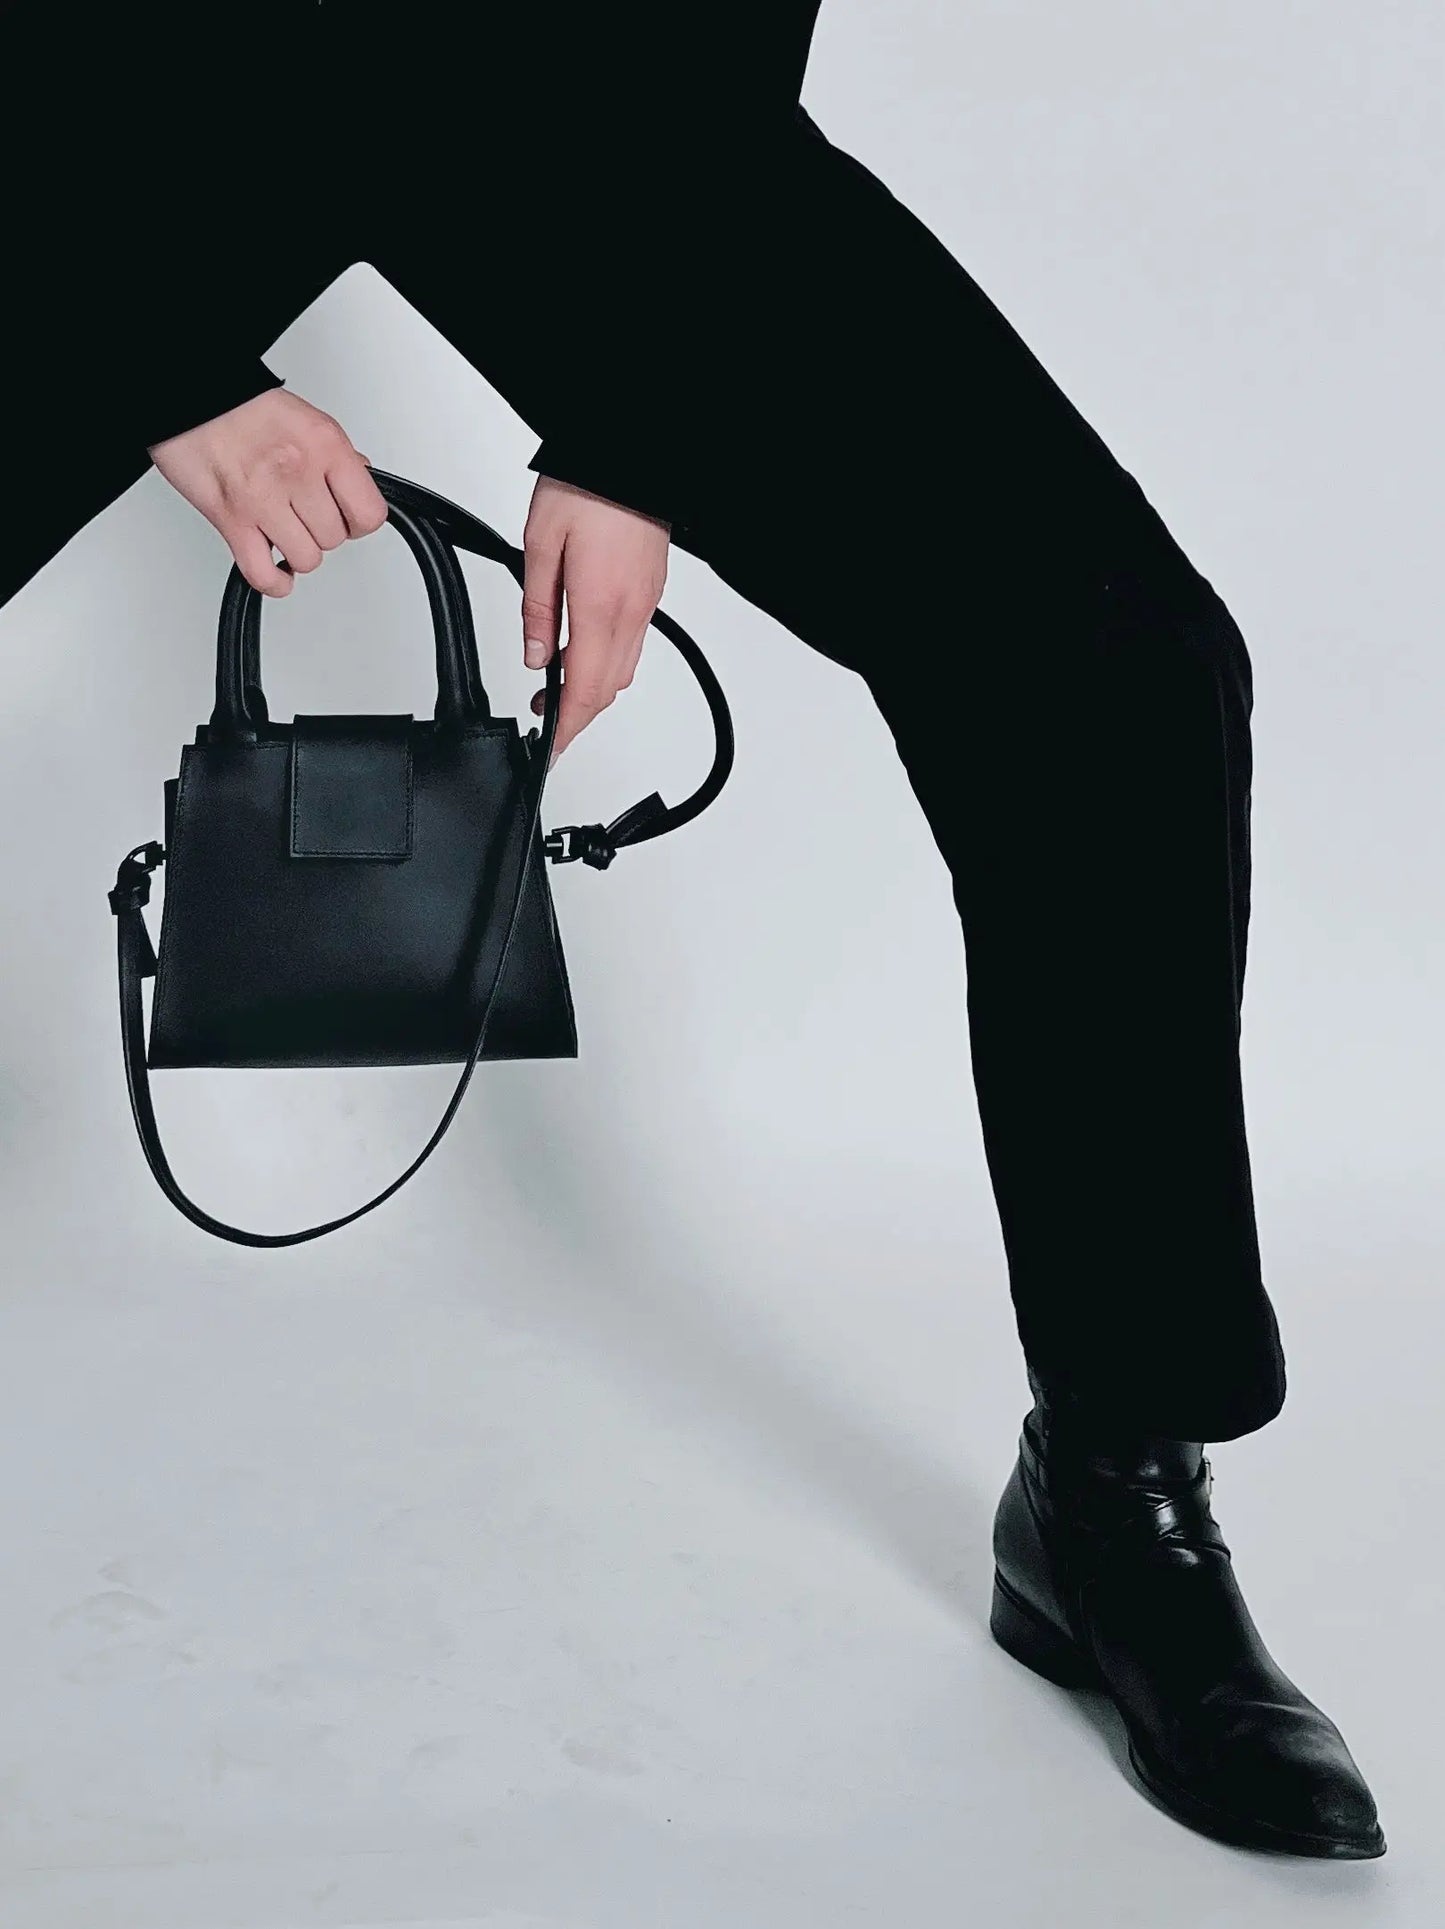 A person holds a black Mini Leather Handbag with reinforced handles, zipper closure, and detachable shoulder strap. Crafted from high-quality leather, featuring knot detailing and interior pocket for organization.